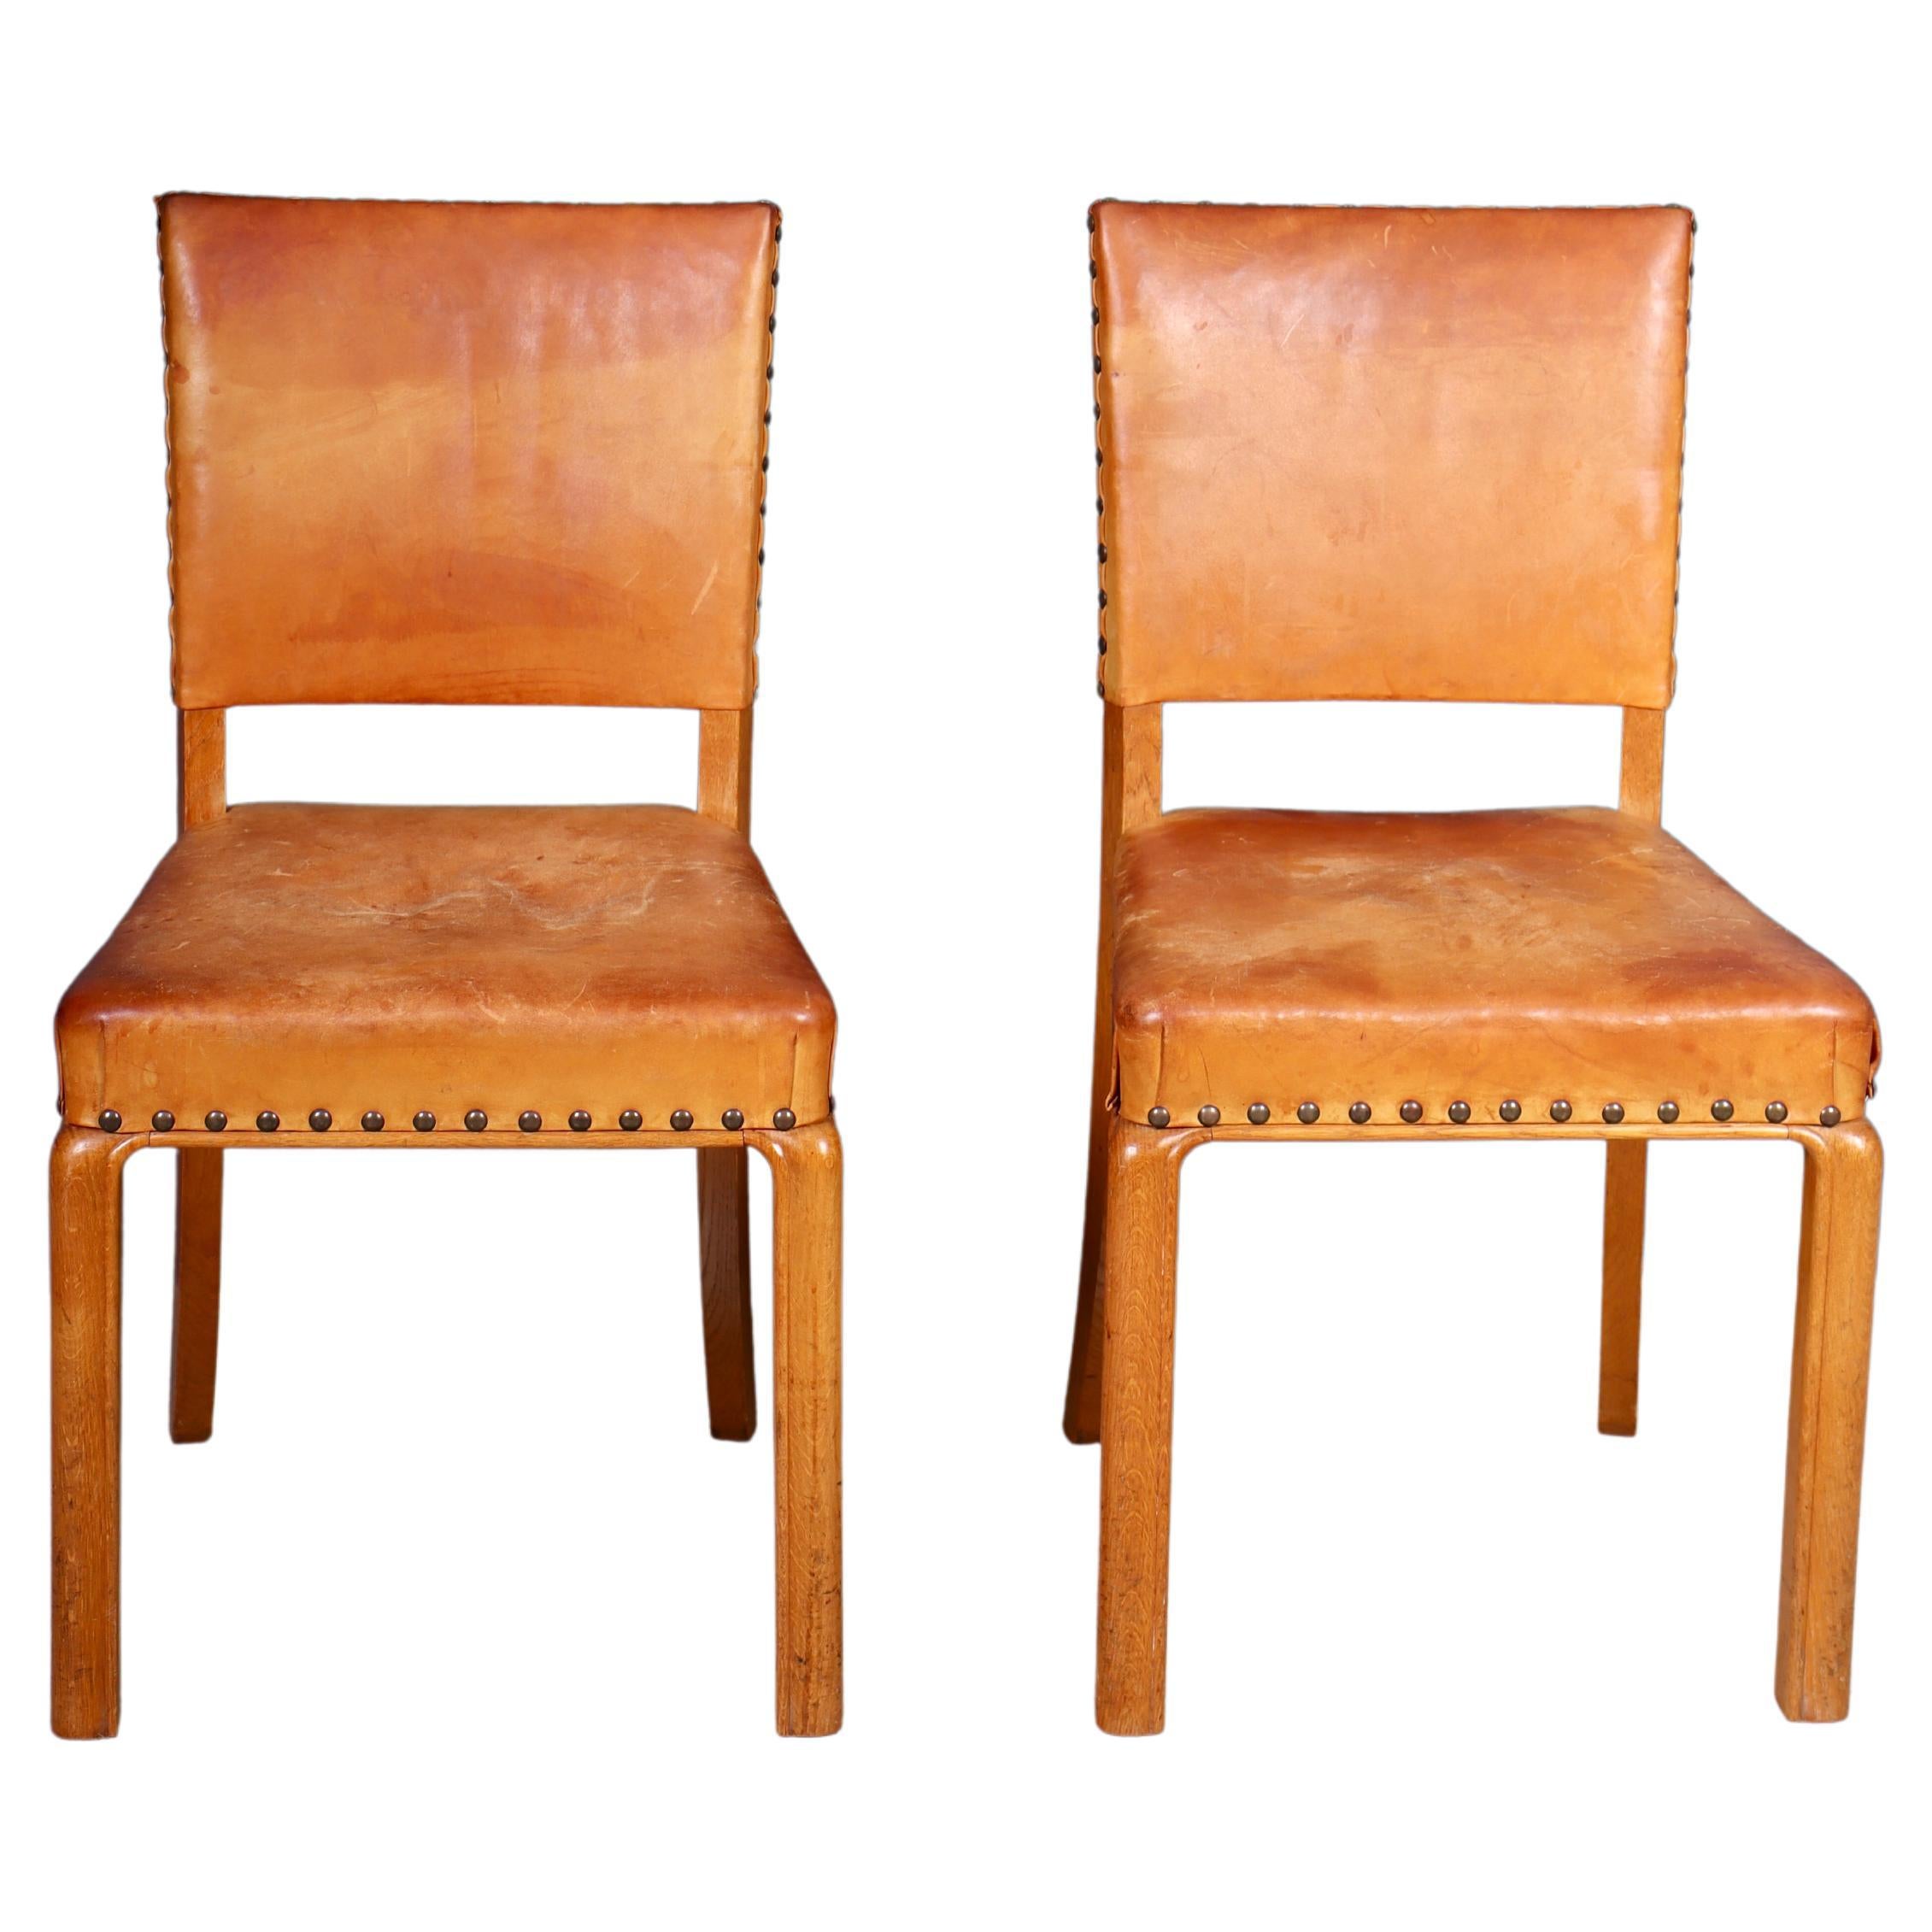 Pair of Danish Mid Century Side Chairs in Patinated Leather, 1940s For Sale